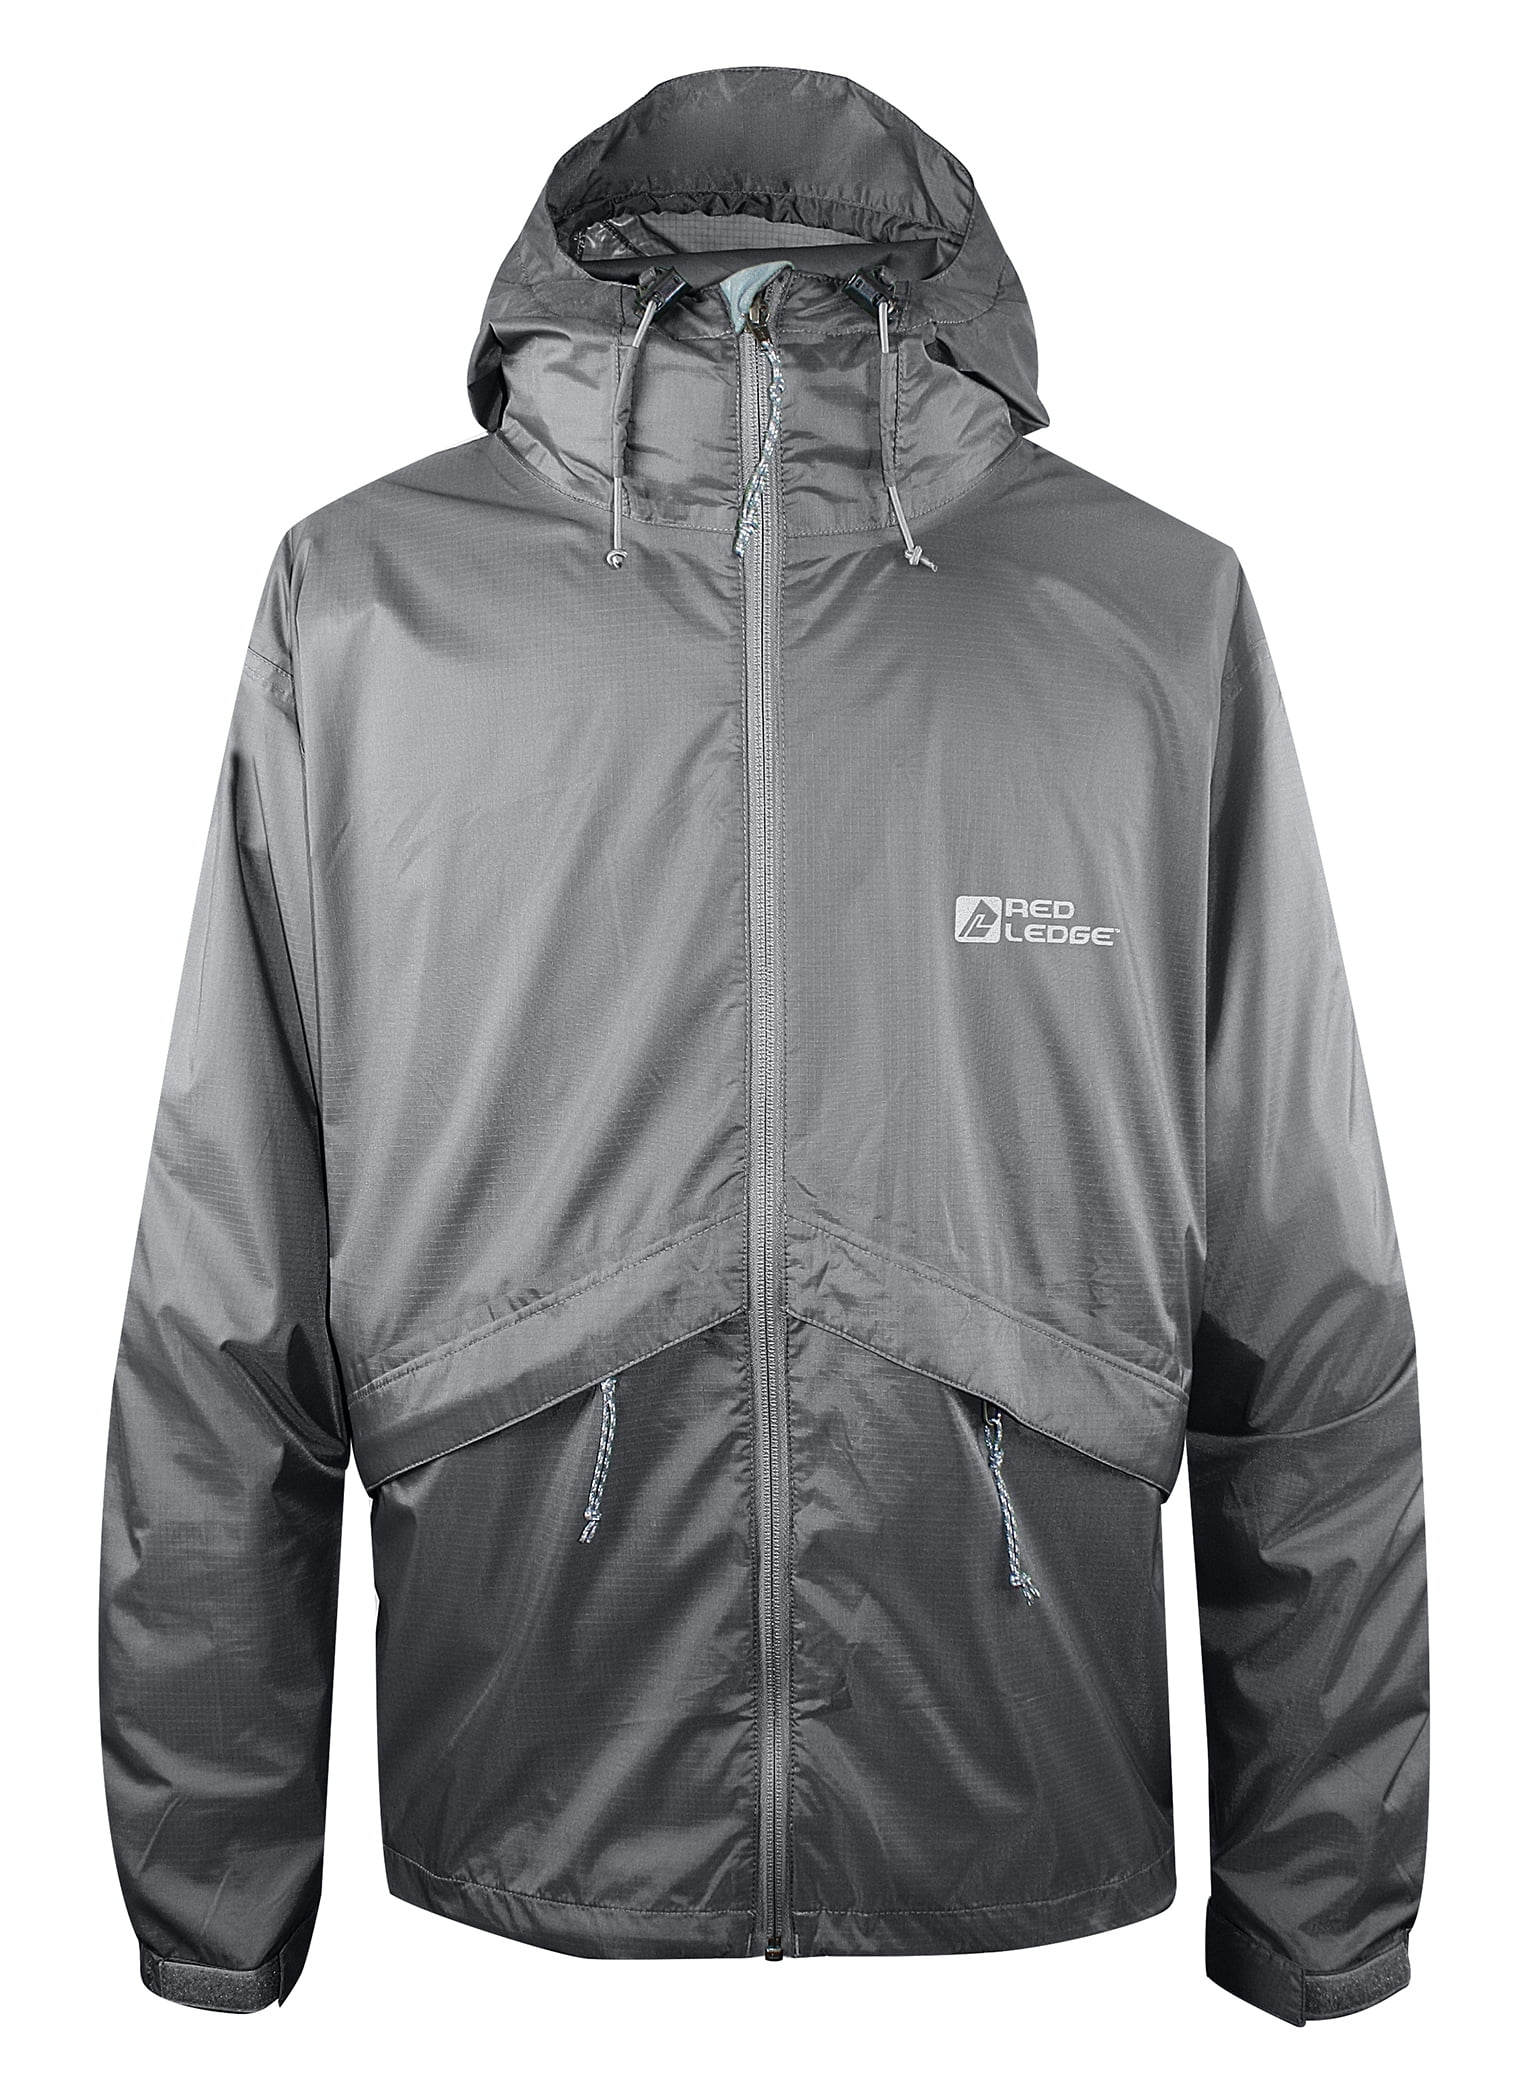 Mist over windbreaker (6), rogue renegade grey sage (4) for a